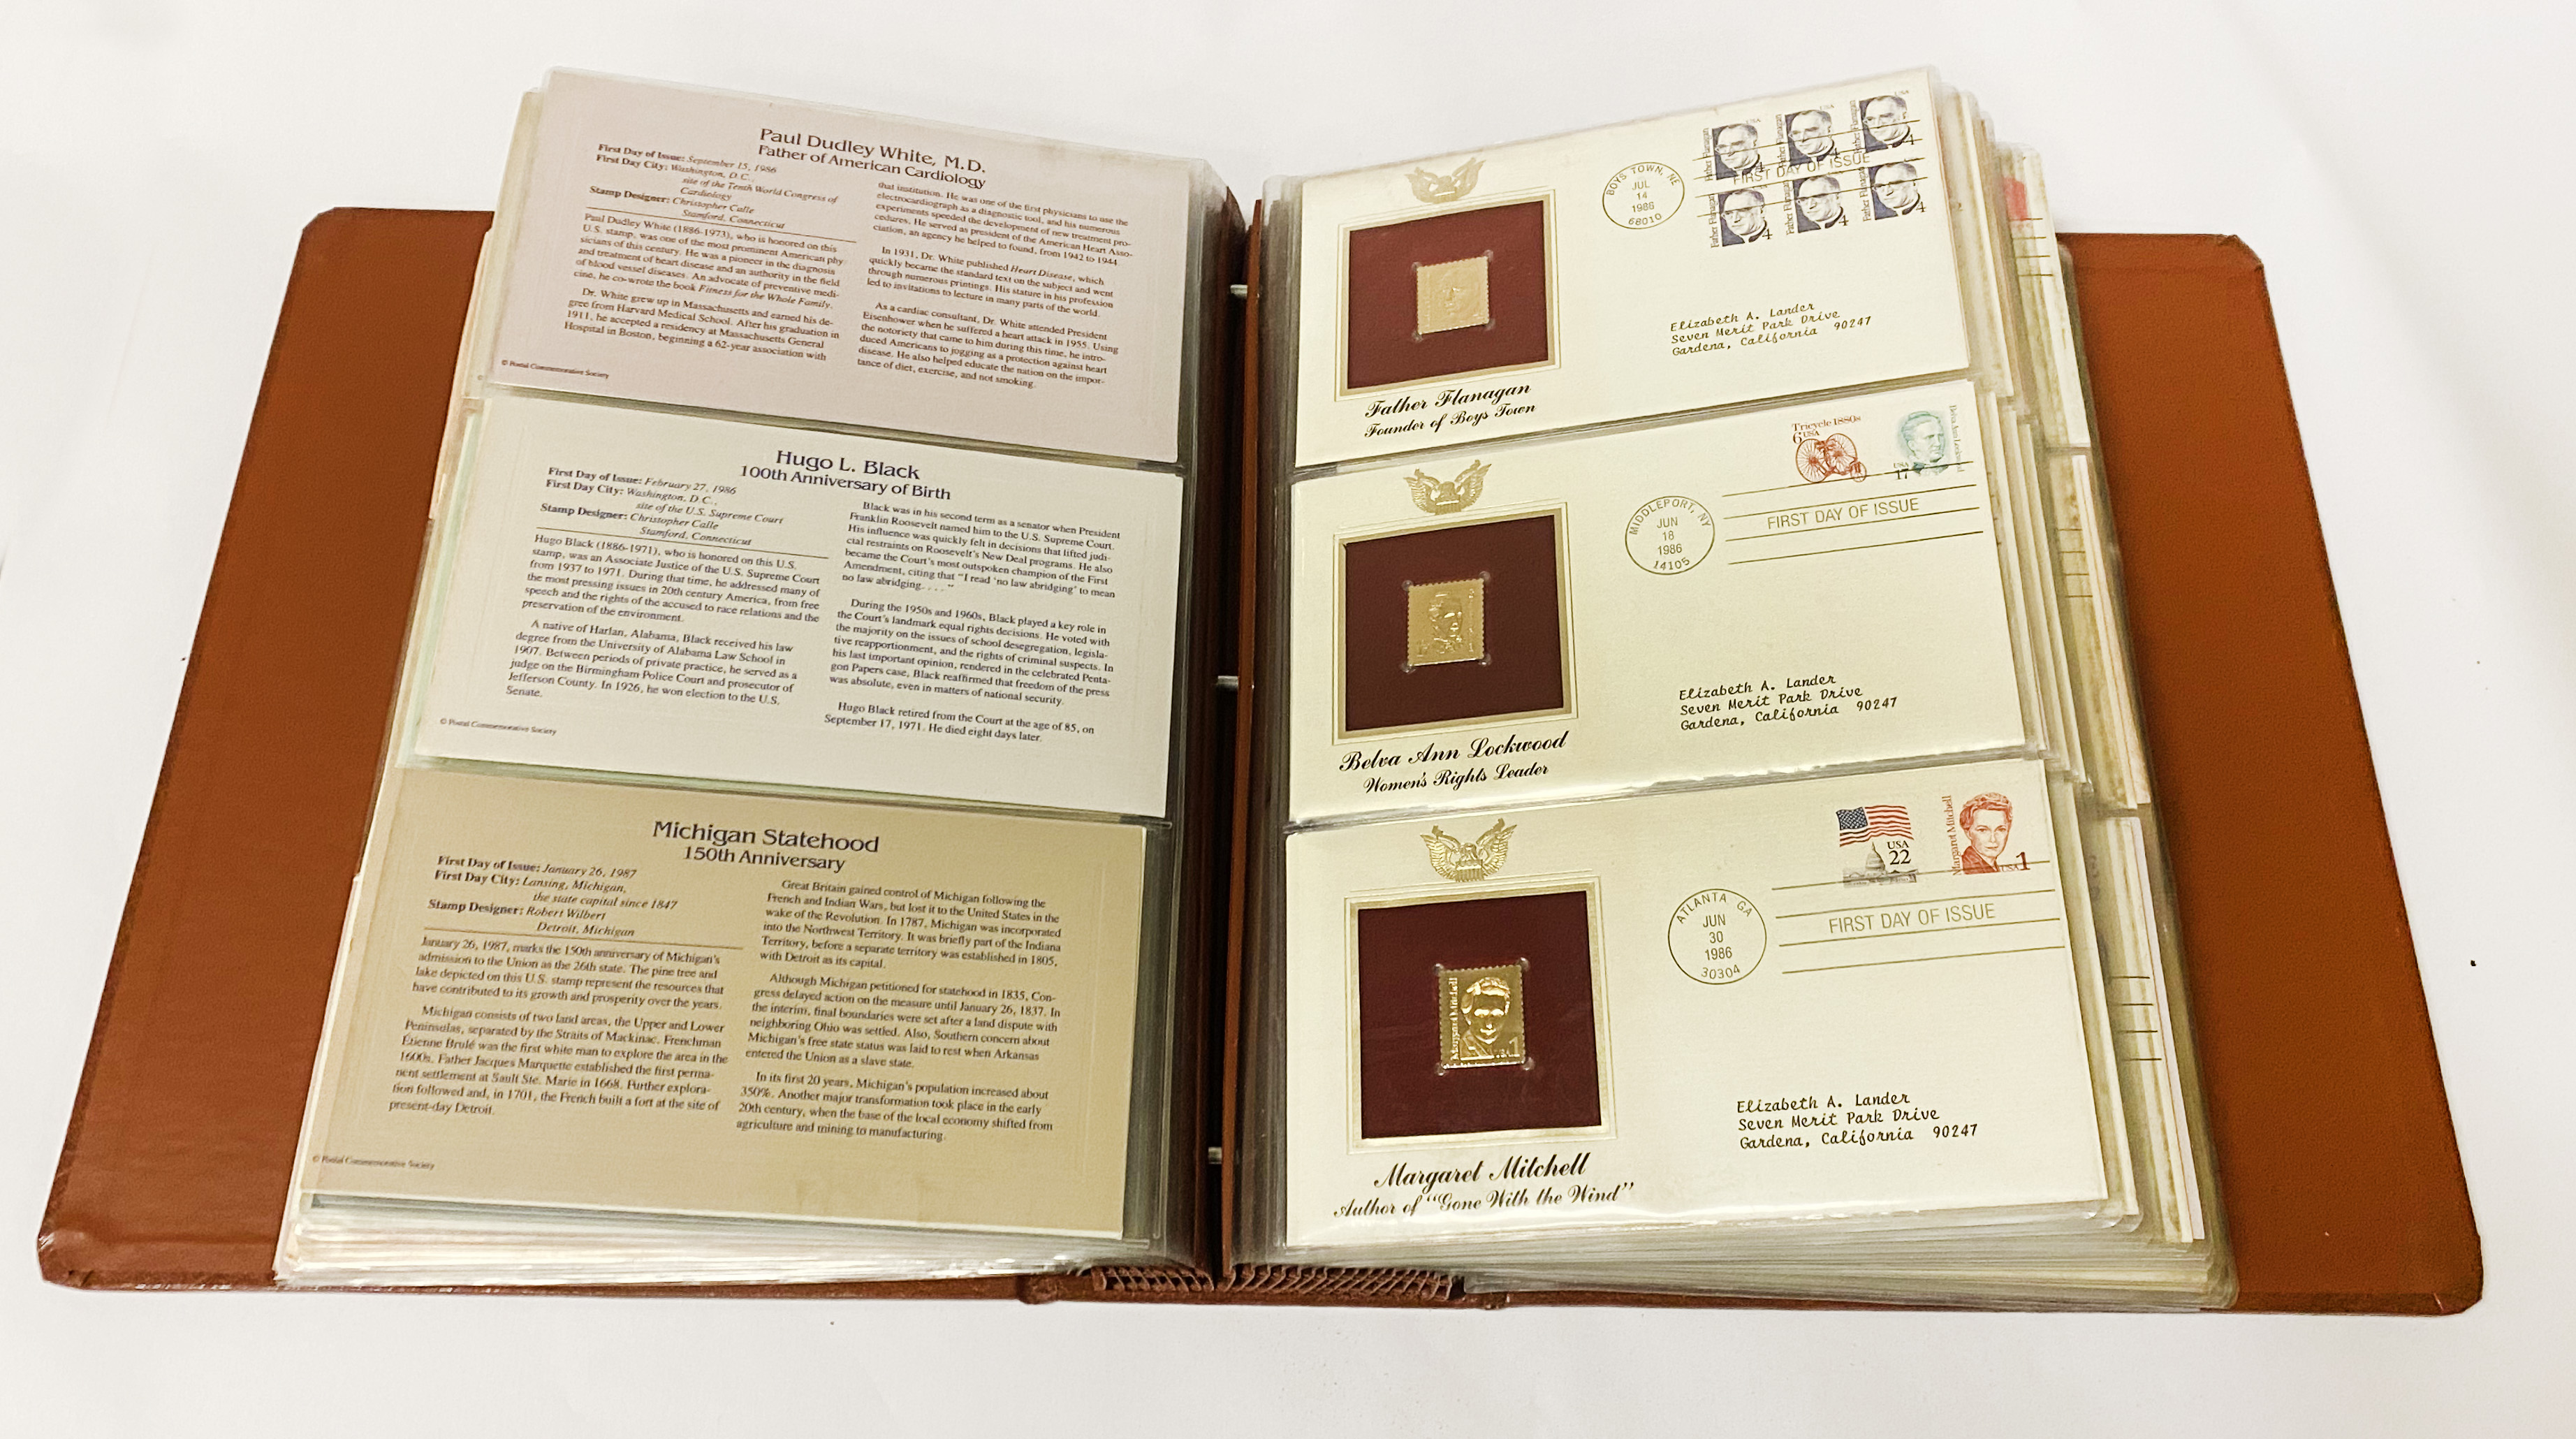 GOLDEN REPLICAS OF UNITED STATES STAMPS - PROOF REPLICAS ON 22CT GOLD PLATED - 42 ISSUES - Image 4 of 8